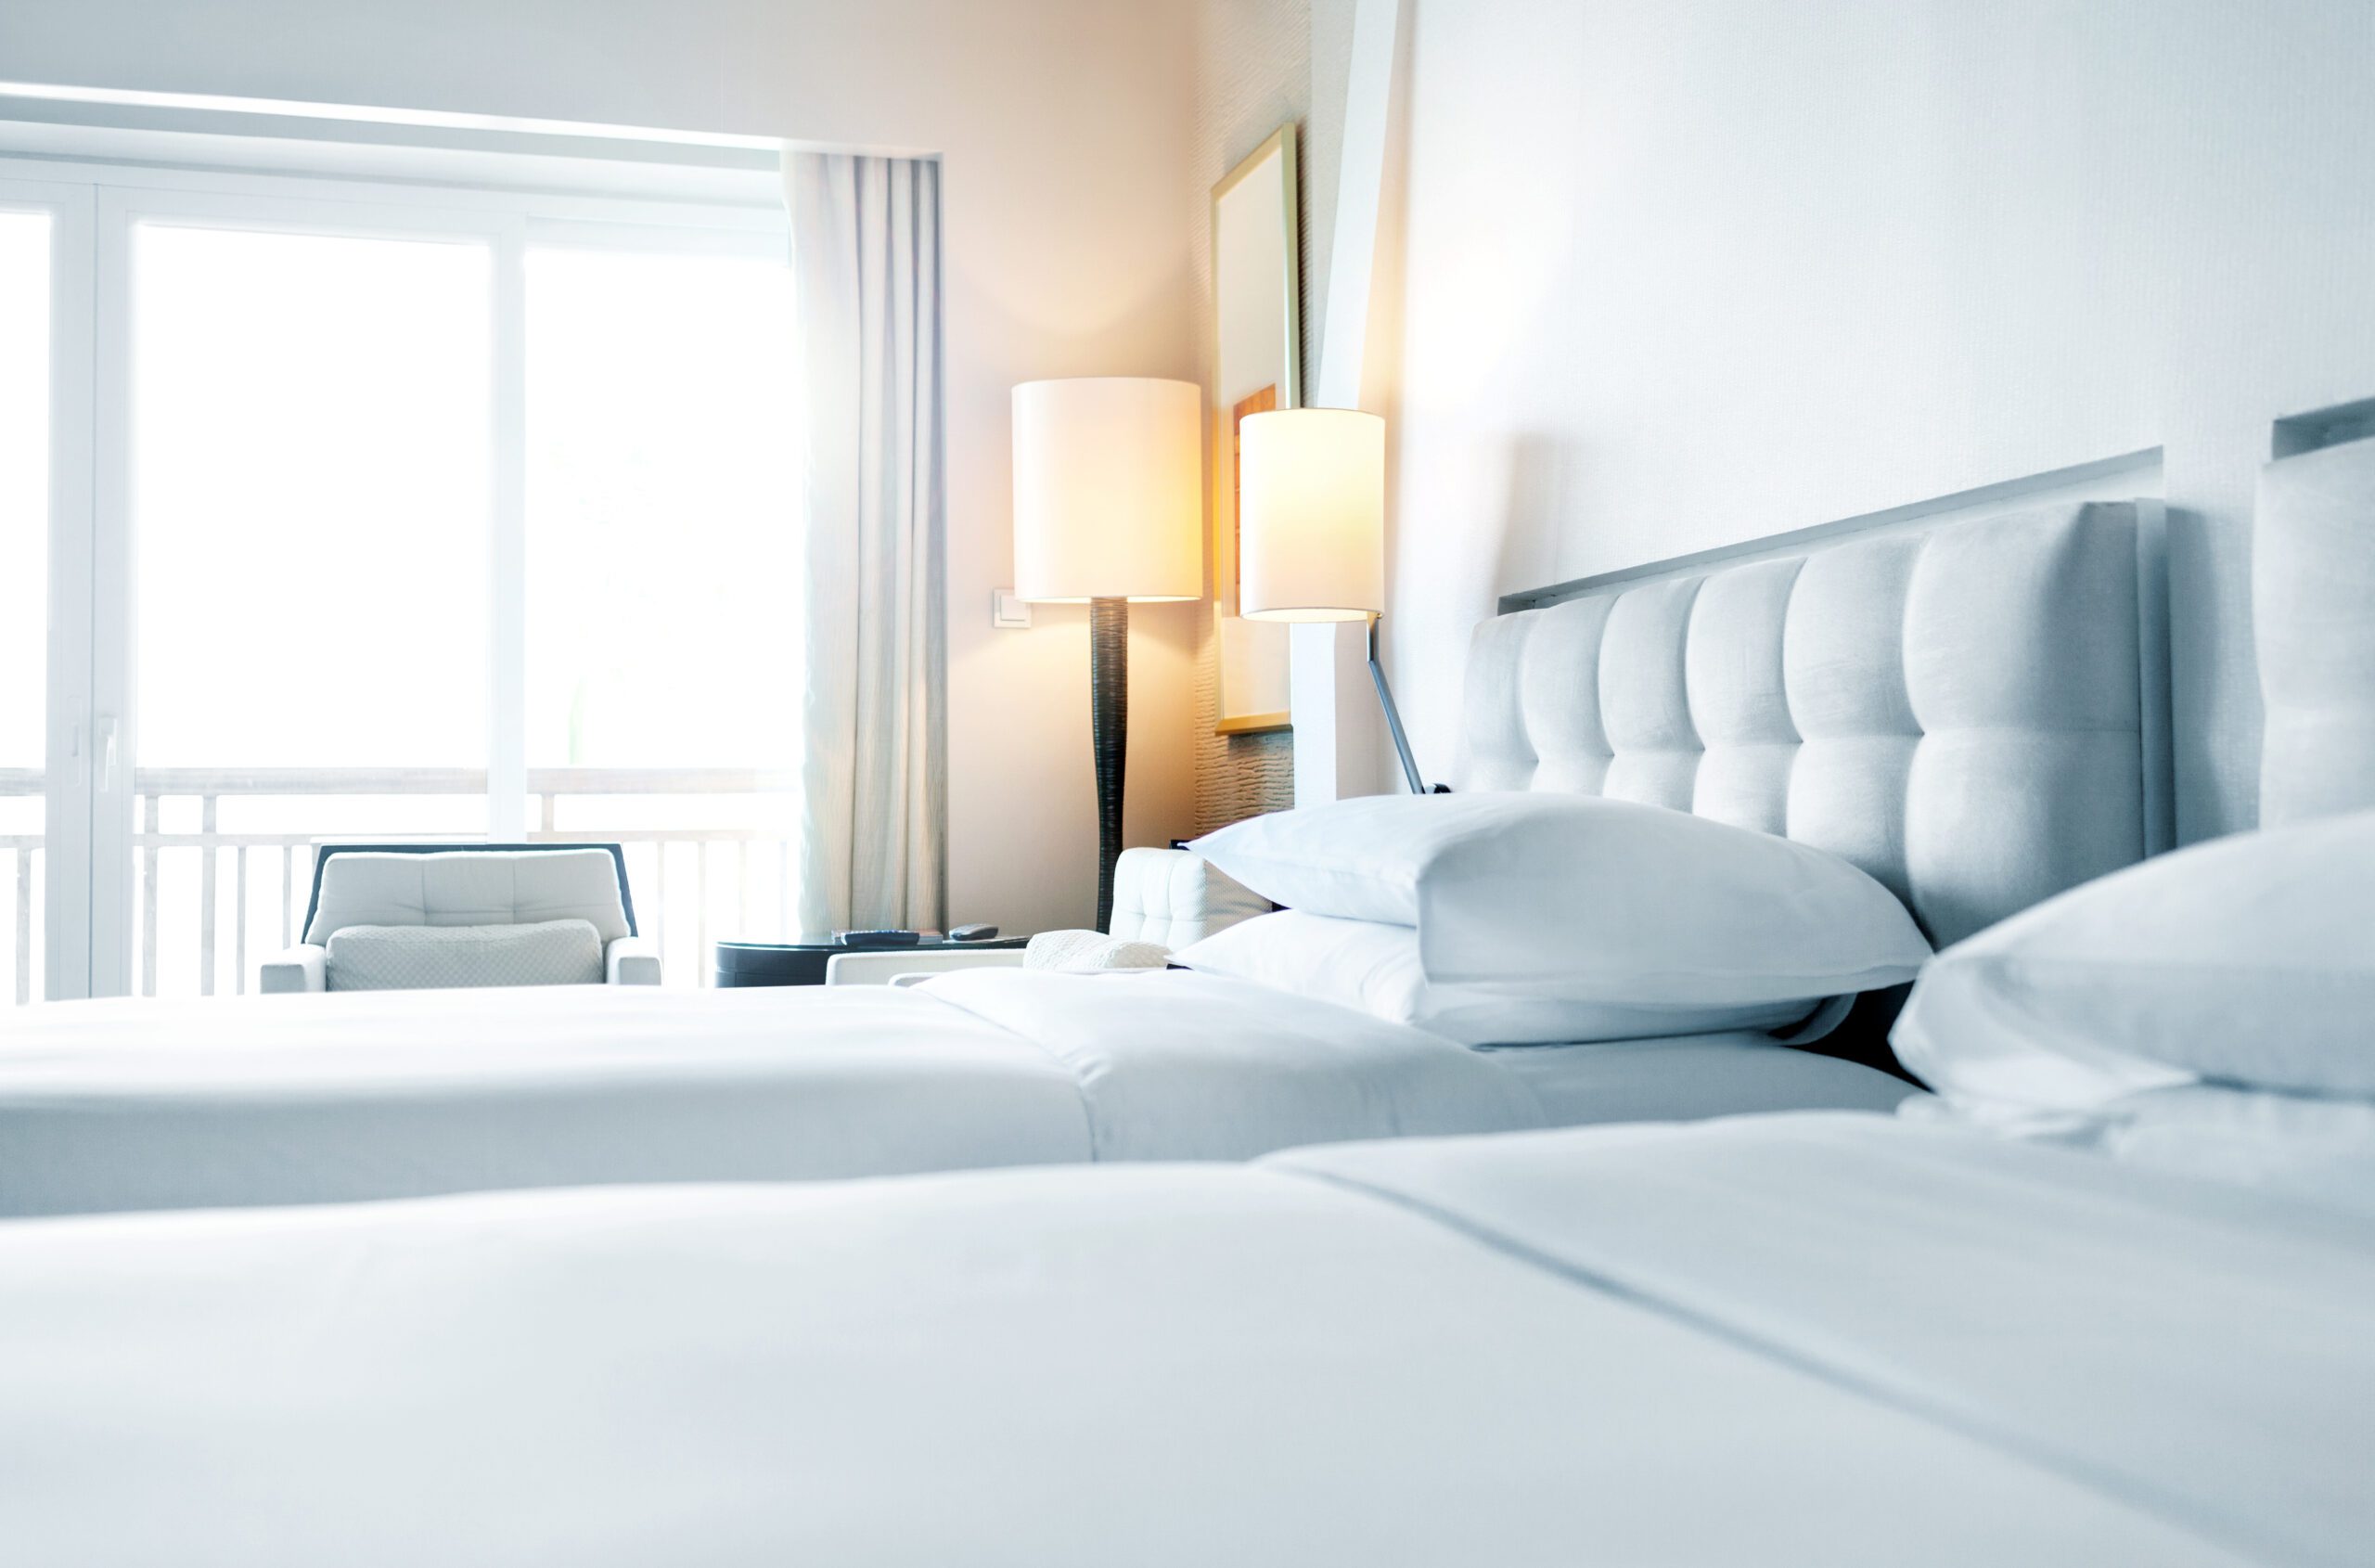 Two twin-sized white linen beds with white headboards and a lit up lamp.